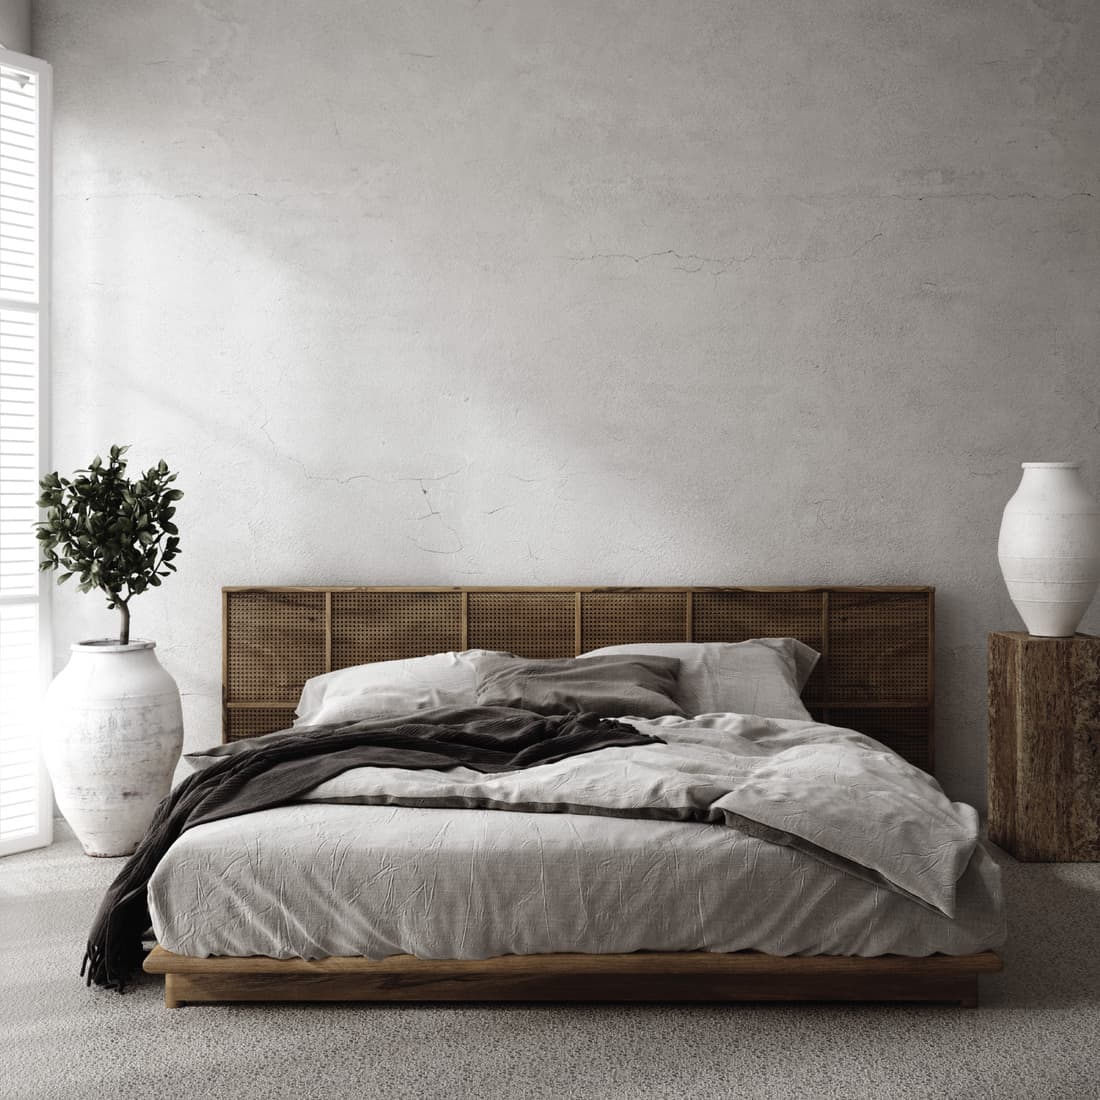 Luxury bedroom interior with minimal decor, loft style. Block Of Wood As Bedside Table